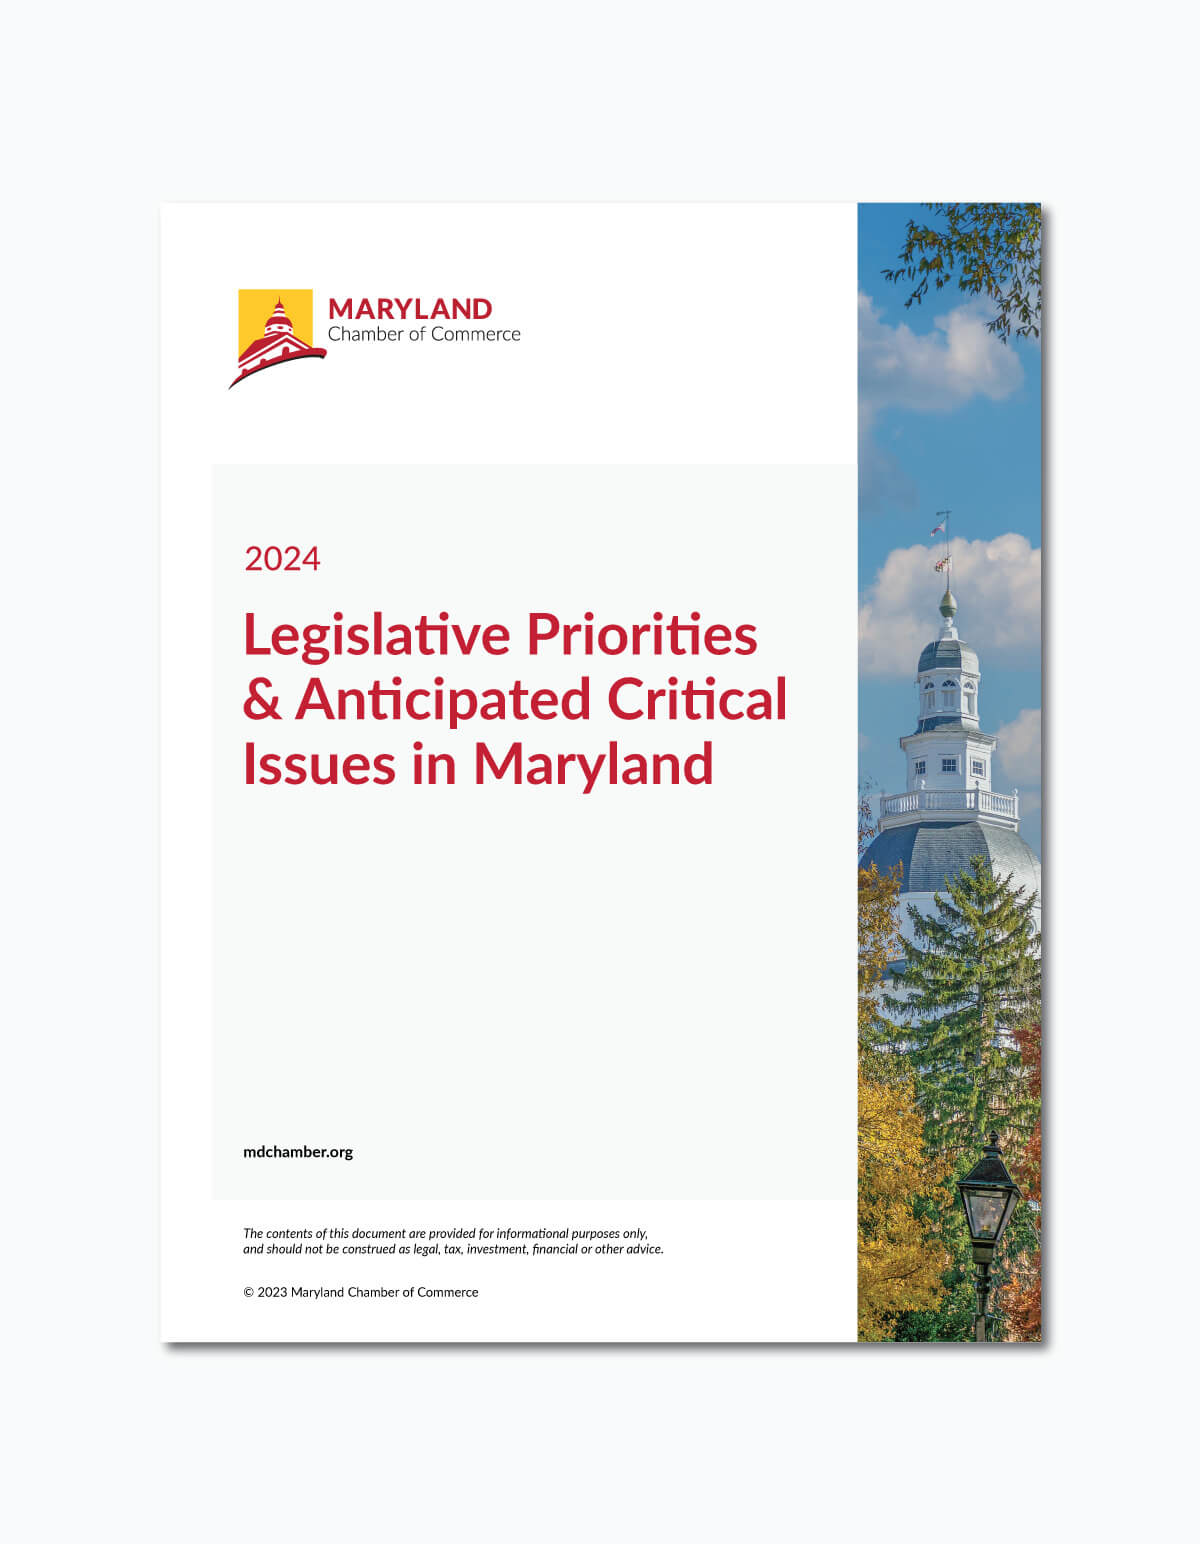 A photo of the Maryland State House, blue skies and trees in the background with a photo of the front cover of the 2024 Legislative Priorities & Anticipated Critical Issues in Maryland. The report details the Maryland Chamber of Commerce's 2024 Legislative Priorities and a number of anticipated issues surrounding policies for business.